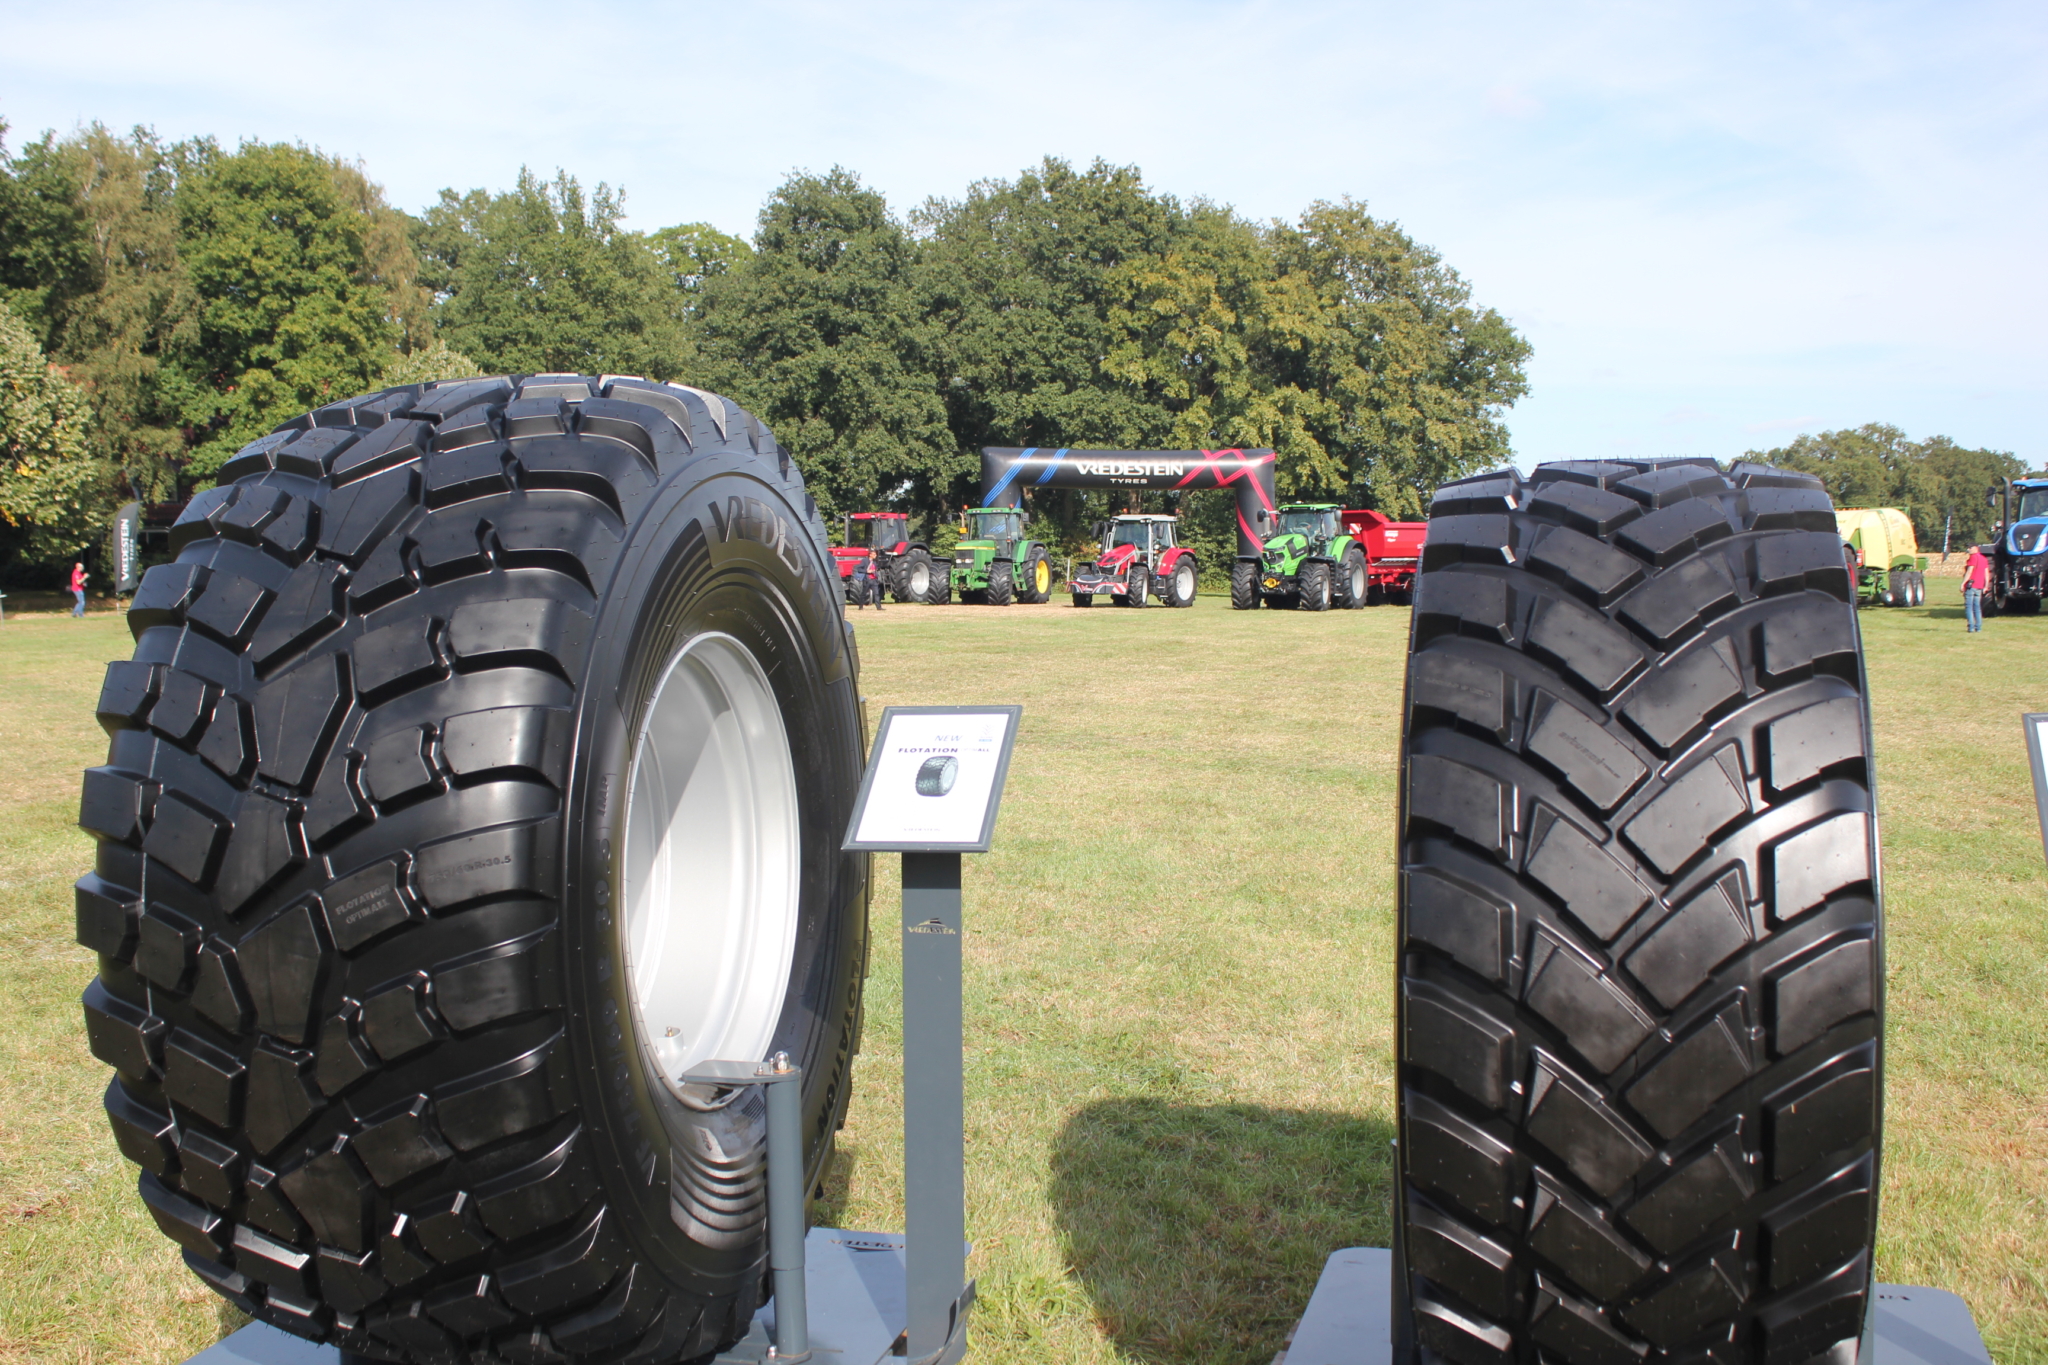 Vredestein celebrates 25 years of Traxion technology, launches two new agri/off-highway tyres